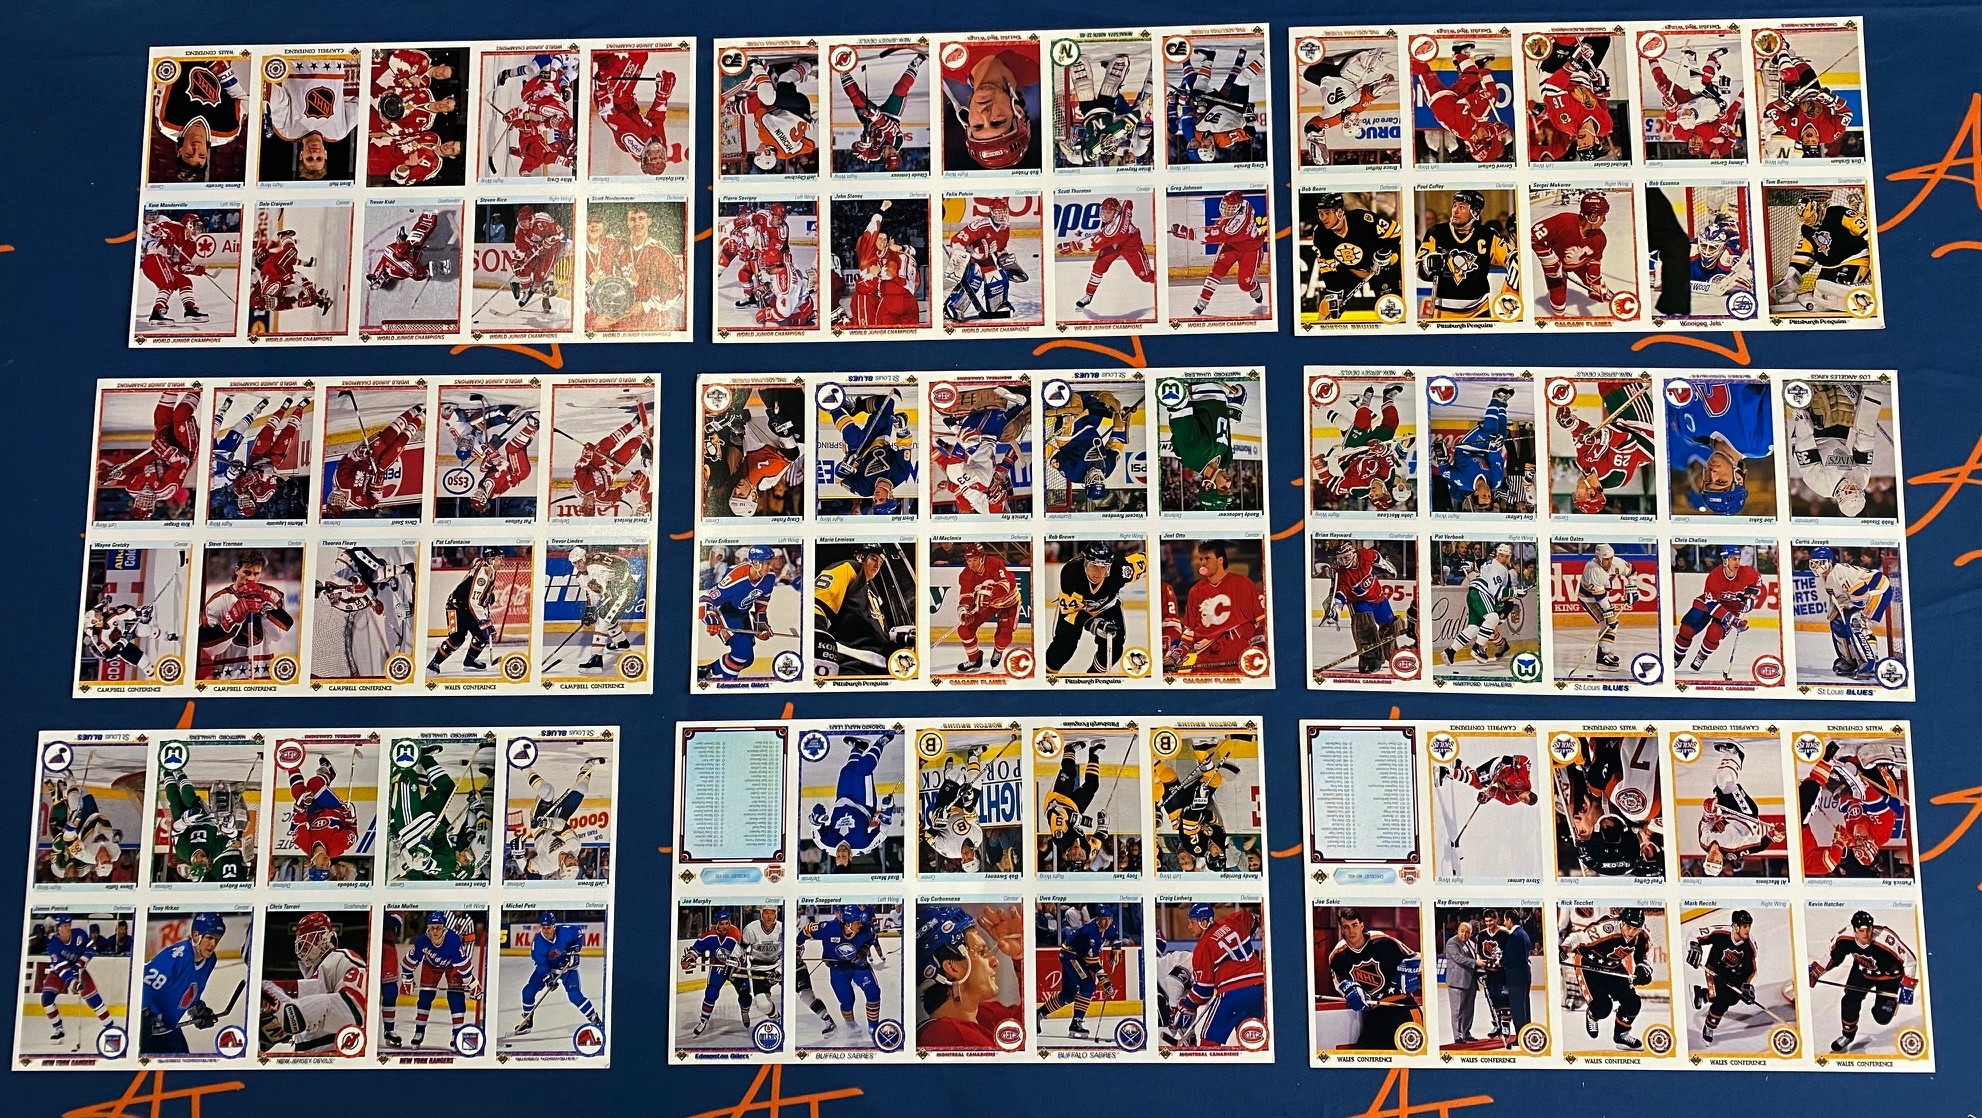 1990-91 Upper Deck Hockey 53 Uncut Sheets of 10 Trading Cards Each